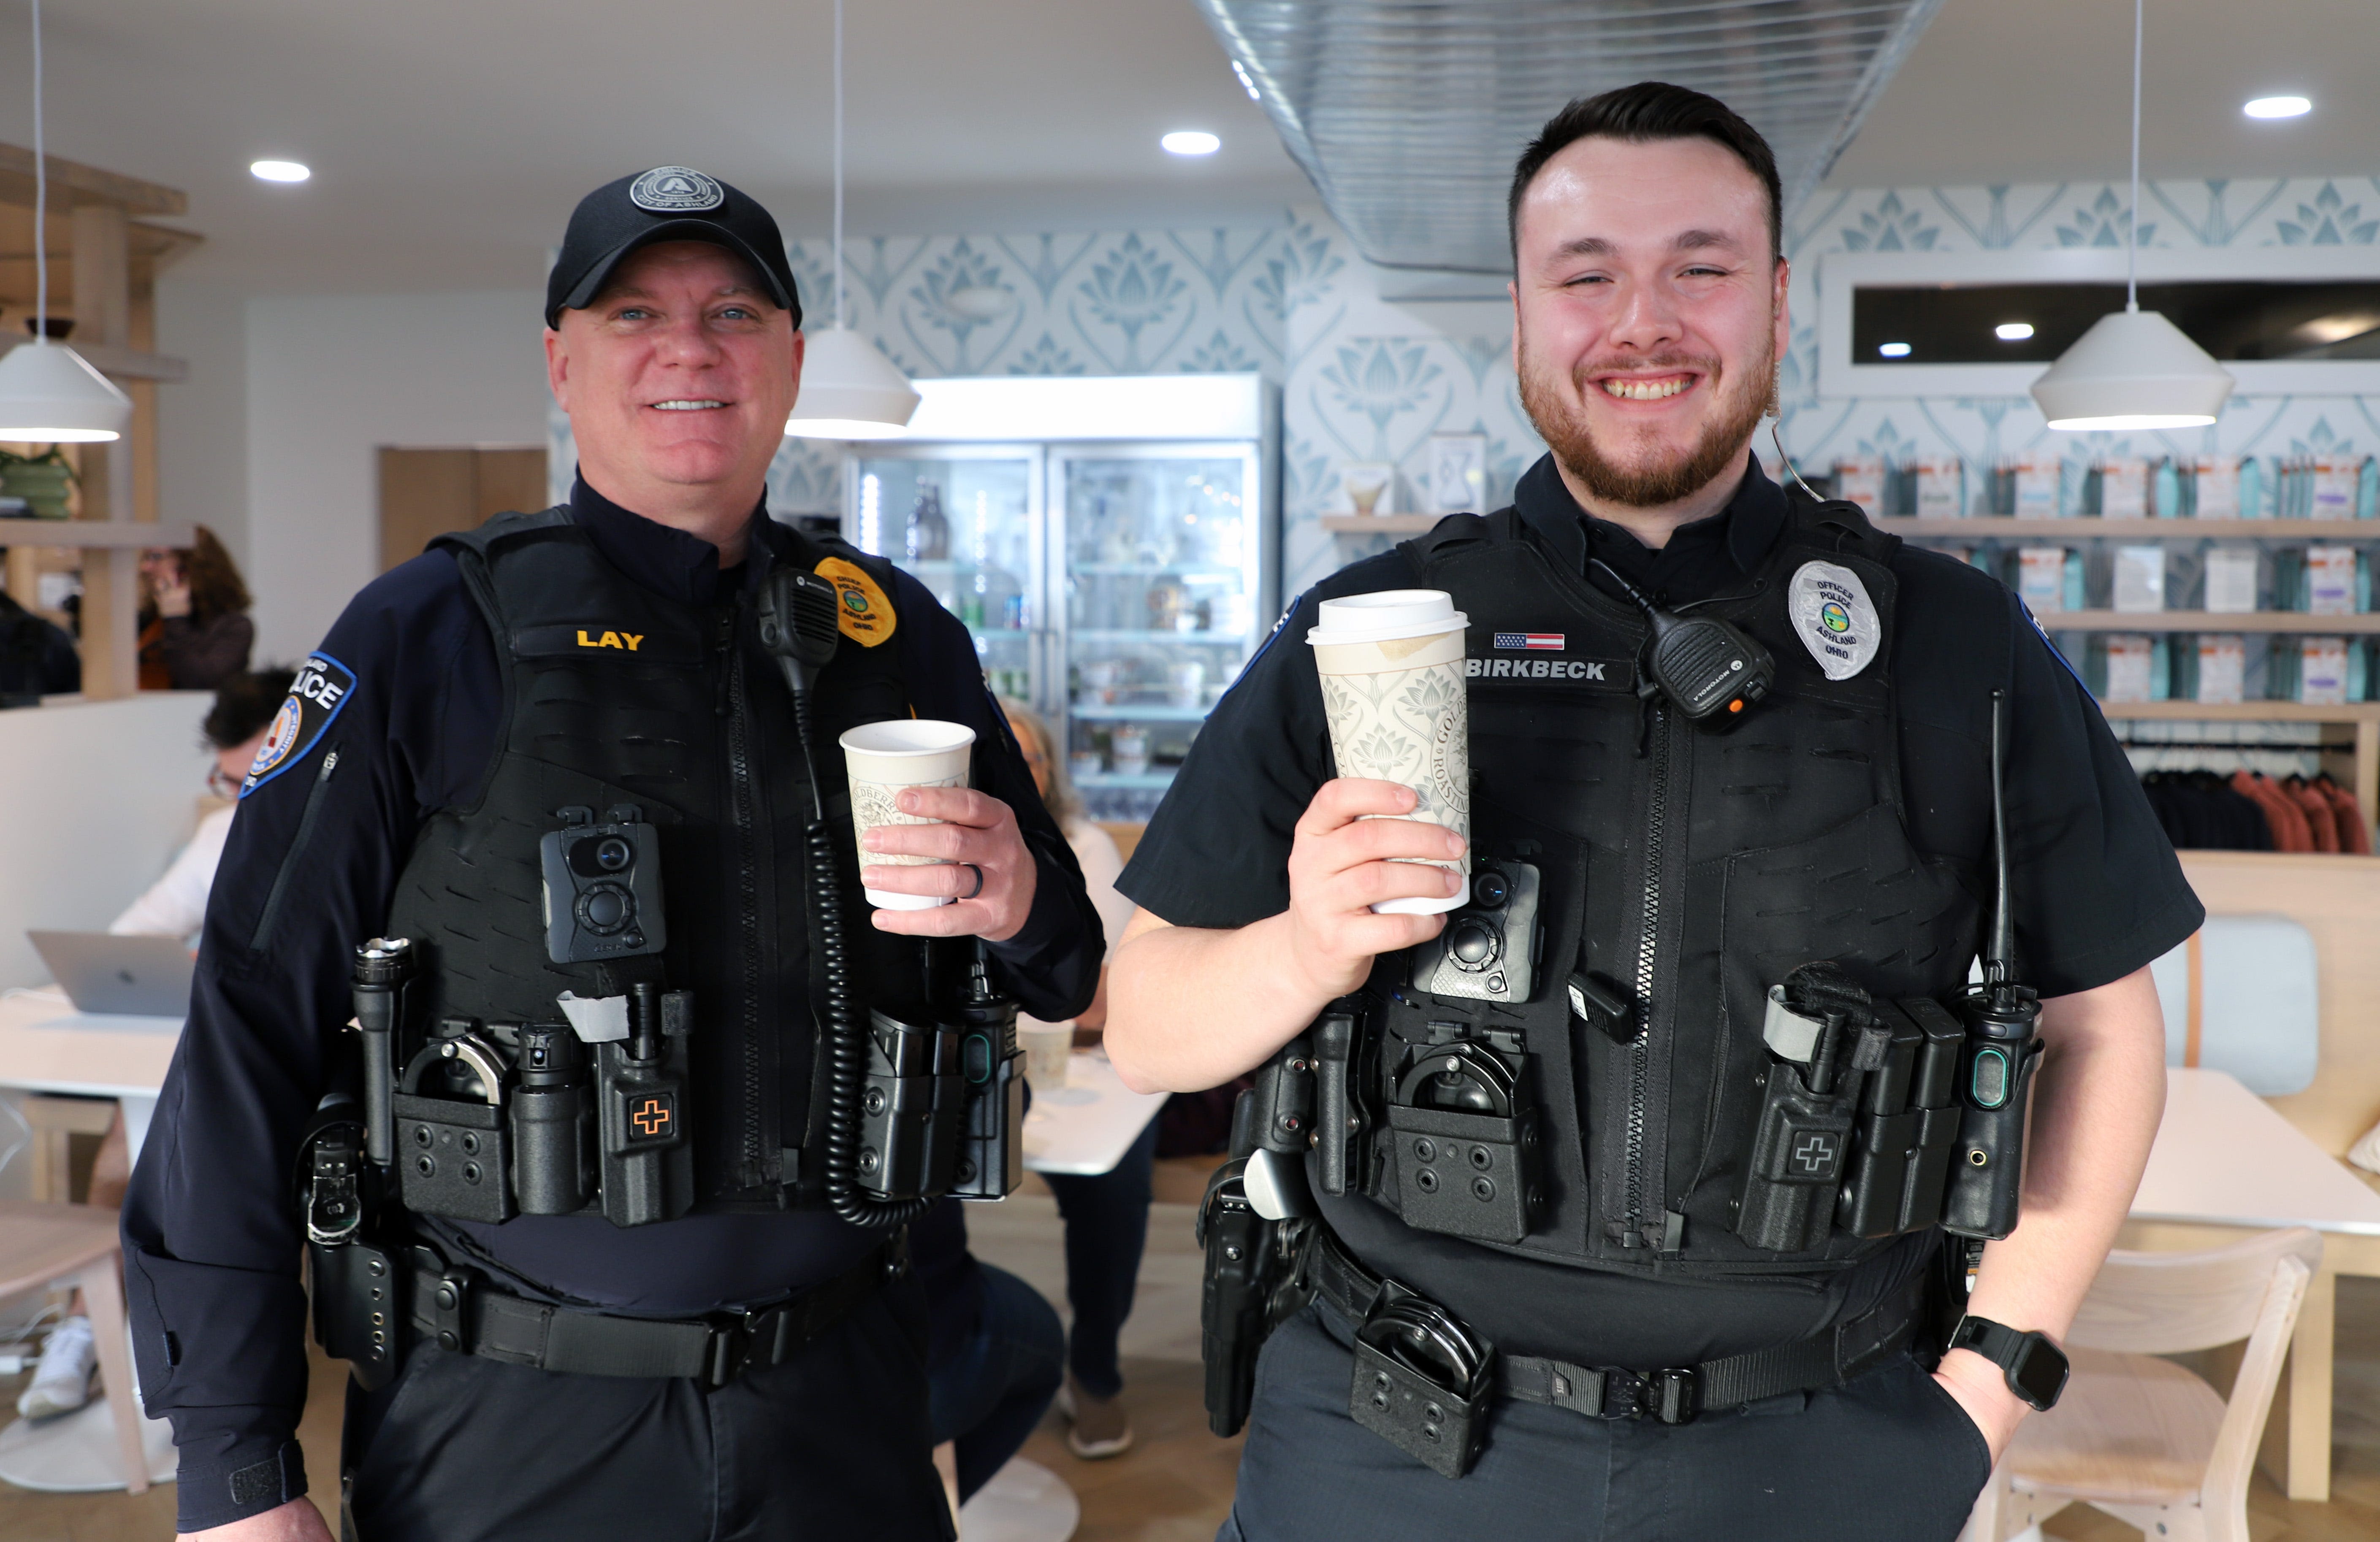 Ashland Police Division invites community to conversation and coffee at Downtown Perk